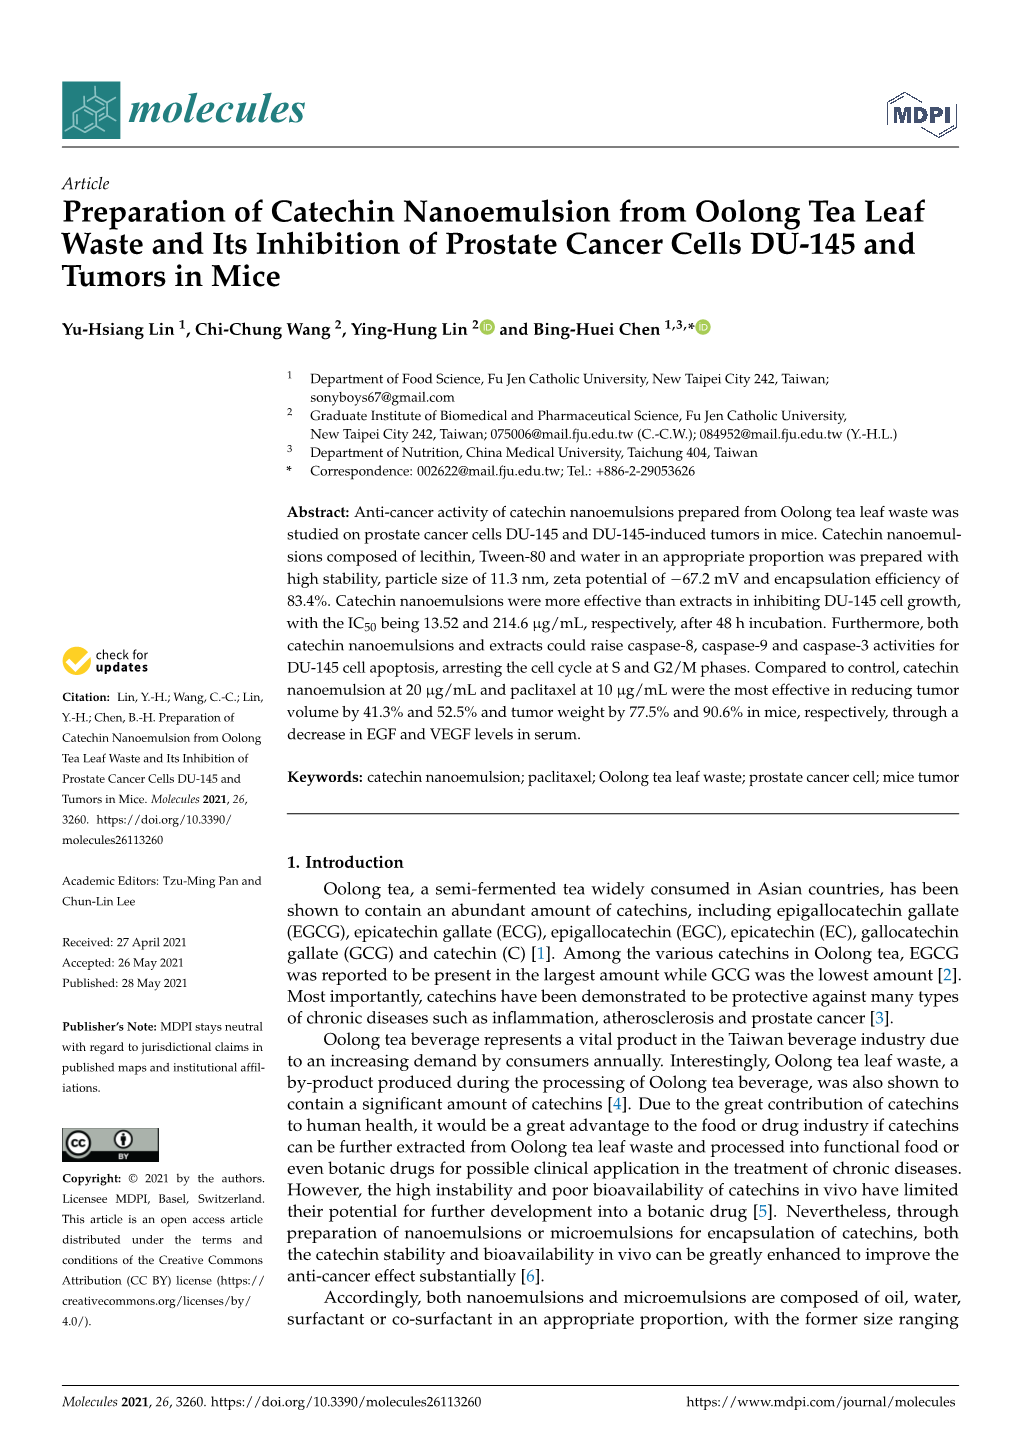 Preparation of Catechin Nanoemulsion from Oolong Tea Leaf Waste and Its Inhibition of Prostate Cancer Cells DU-145 and Tumors in Mice